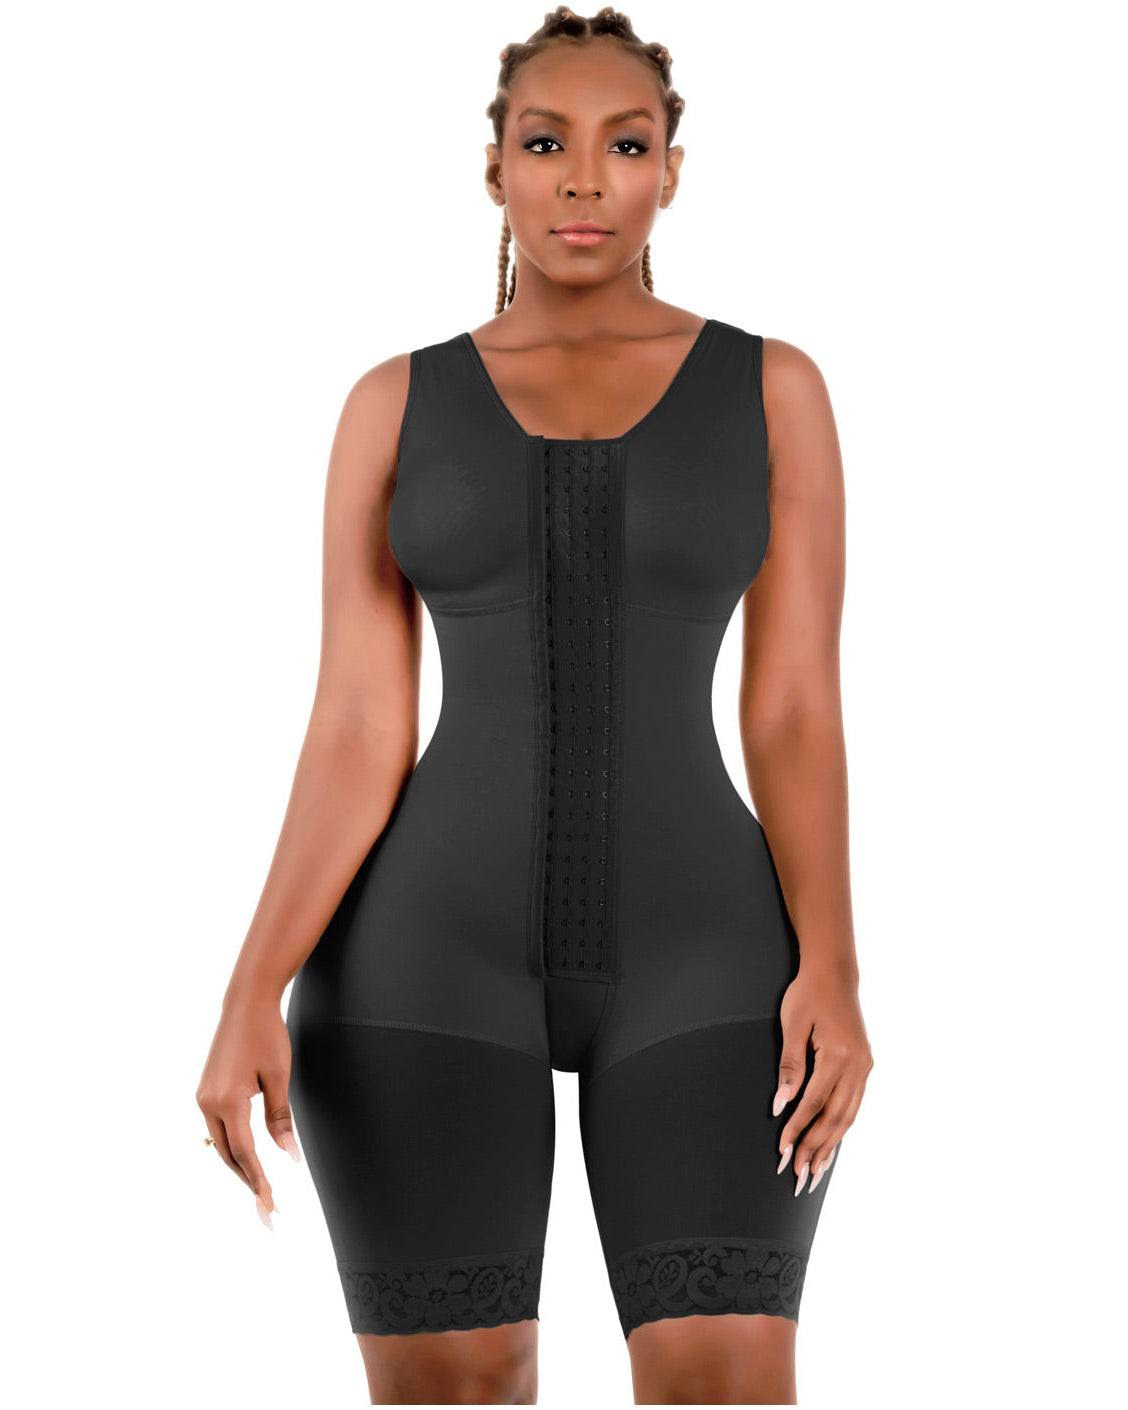 Bling Shapers Extreme | Shapewear Bodysuit With Built-in Bra | Post Surgery & Daily Use